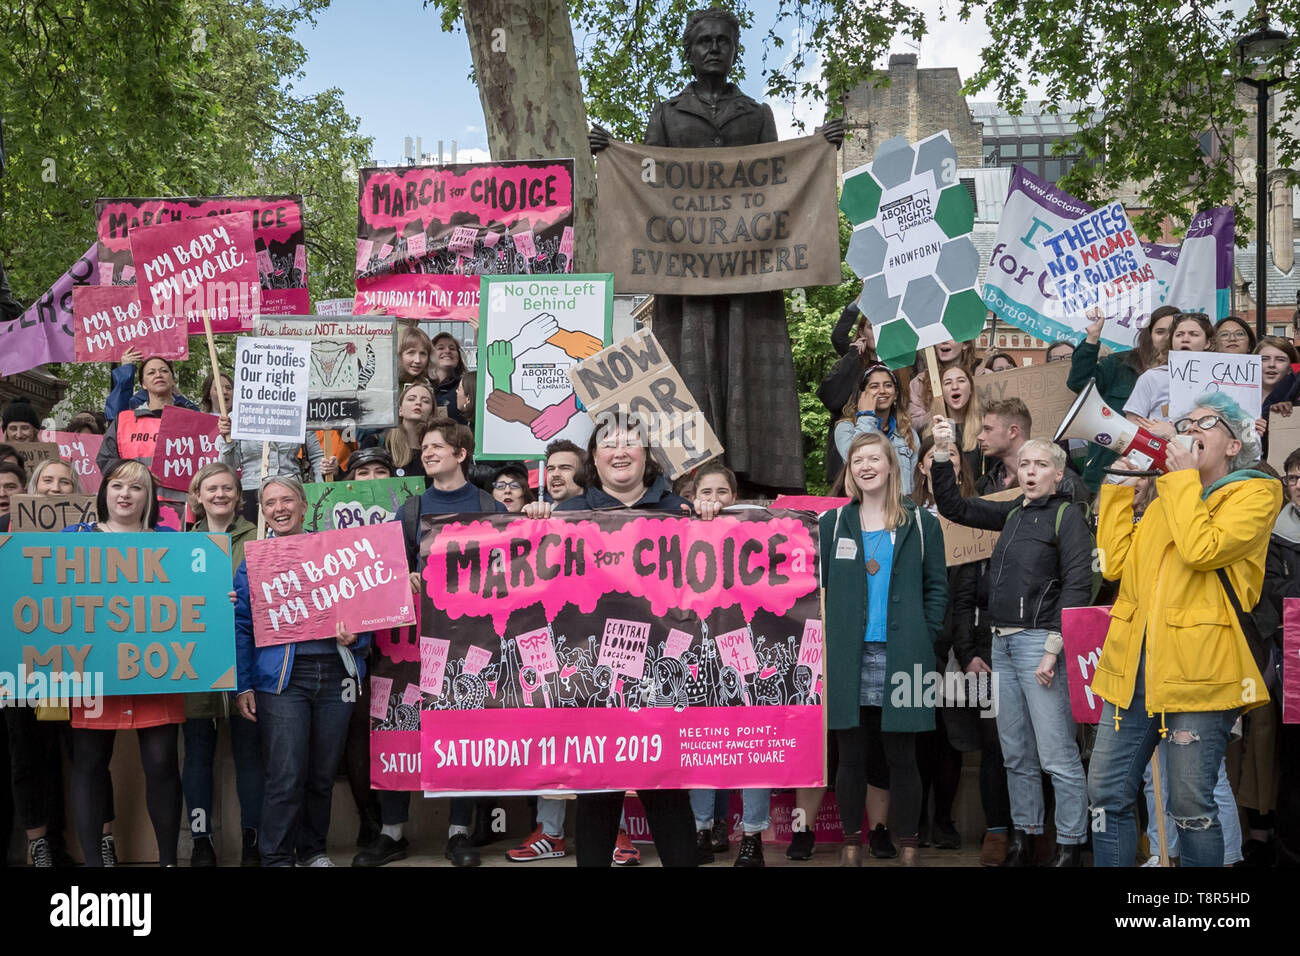 Women’s Pro-Choice groups including Sister Supporter, Abortion Rights UK and Doctors for Choice UK oppose anti-abortionist protesters in Westminster. Stock Photo